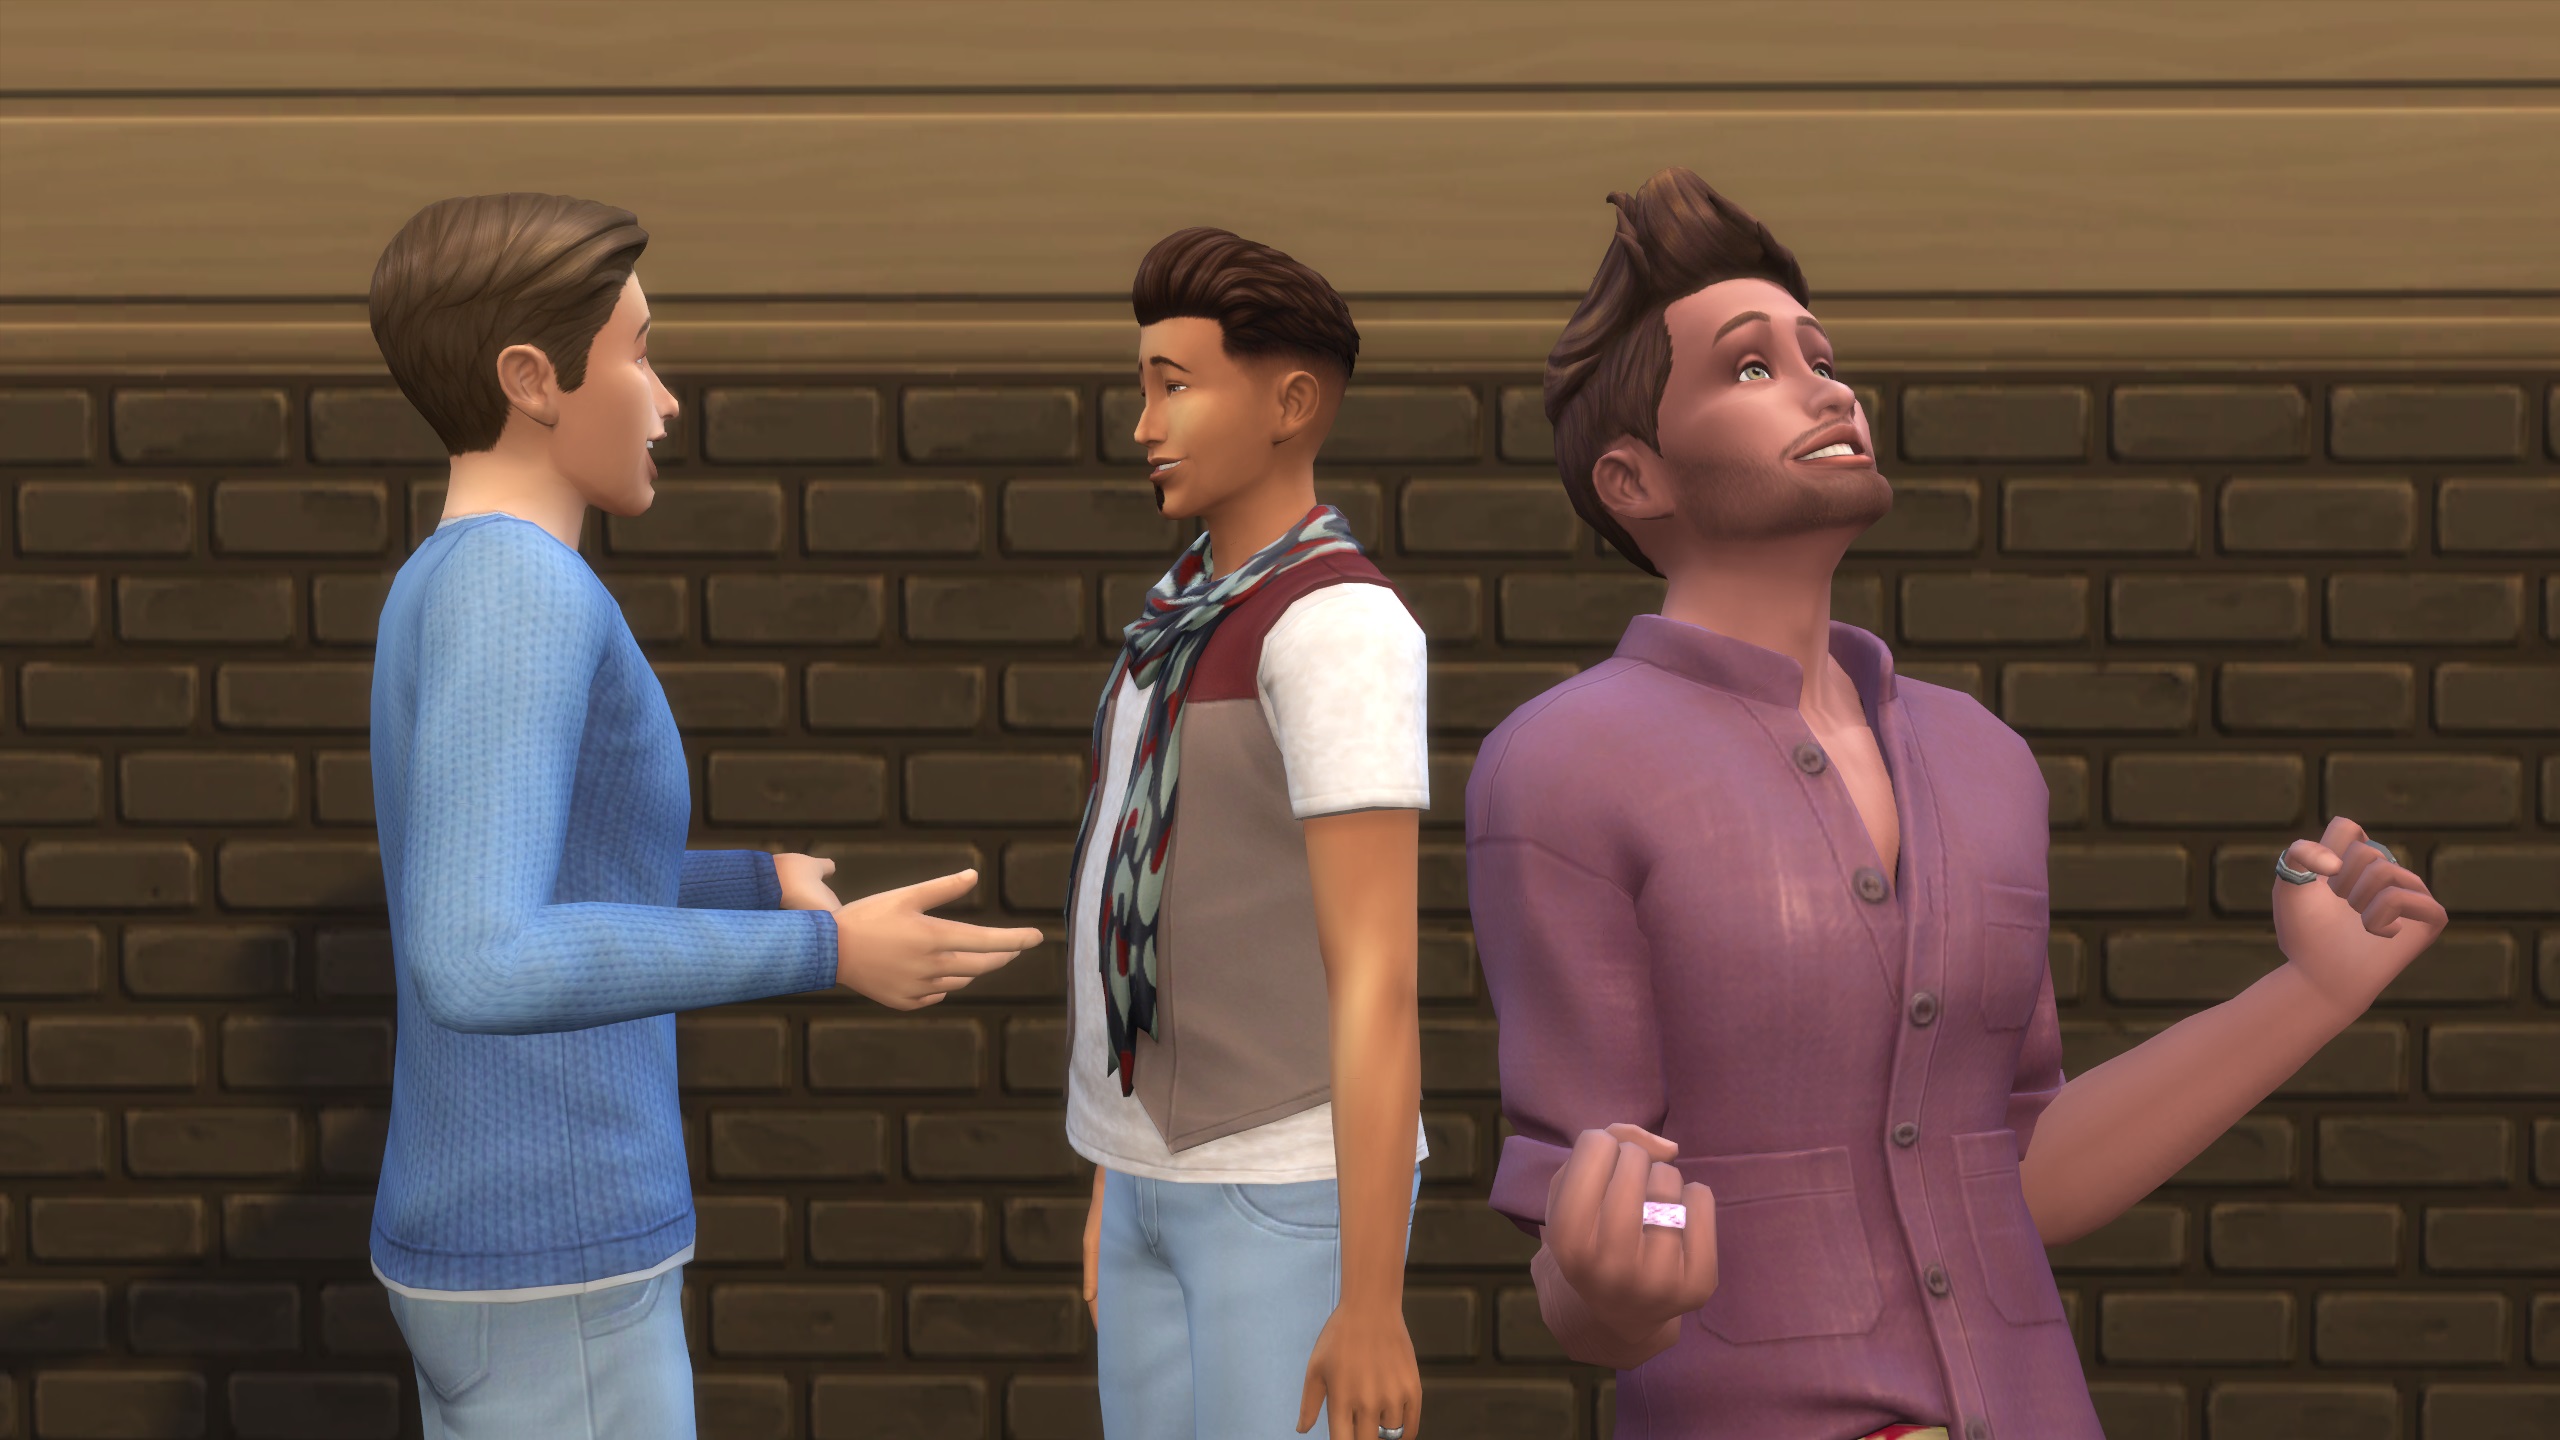 The Sims 4 - Two sims talk together in the background while another cheers with excitement in the front.